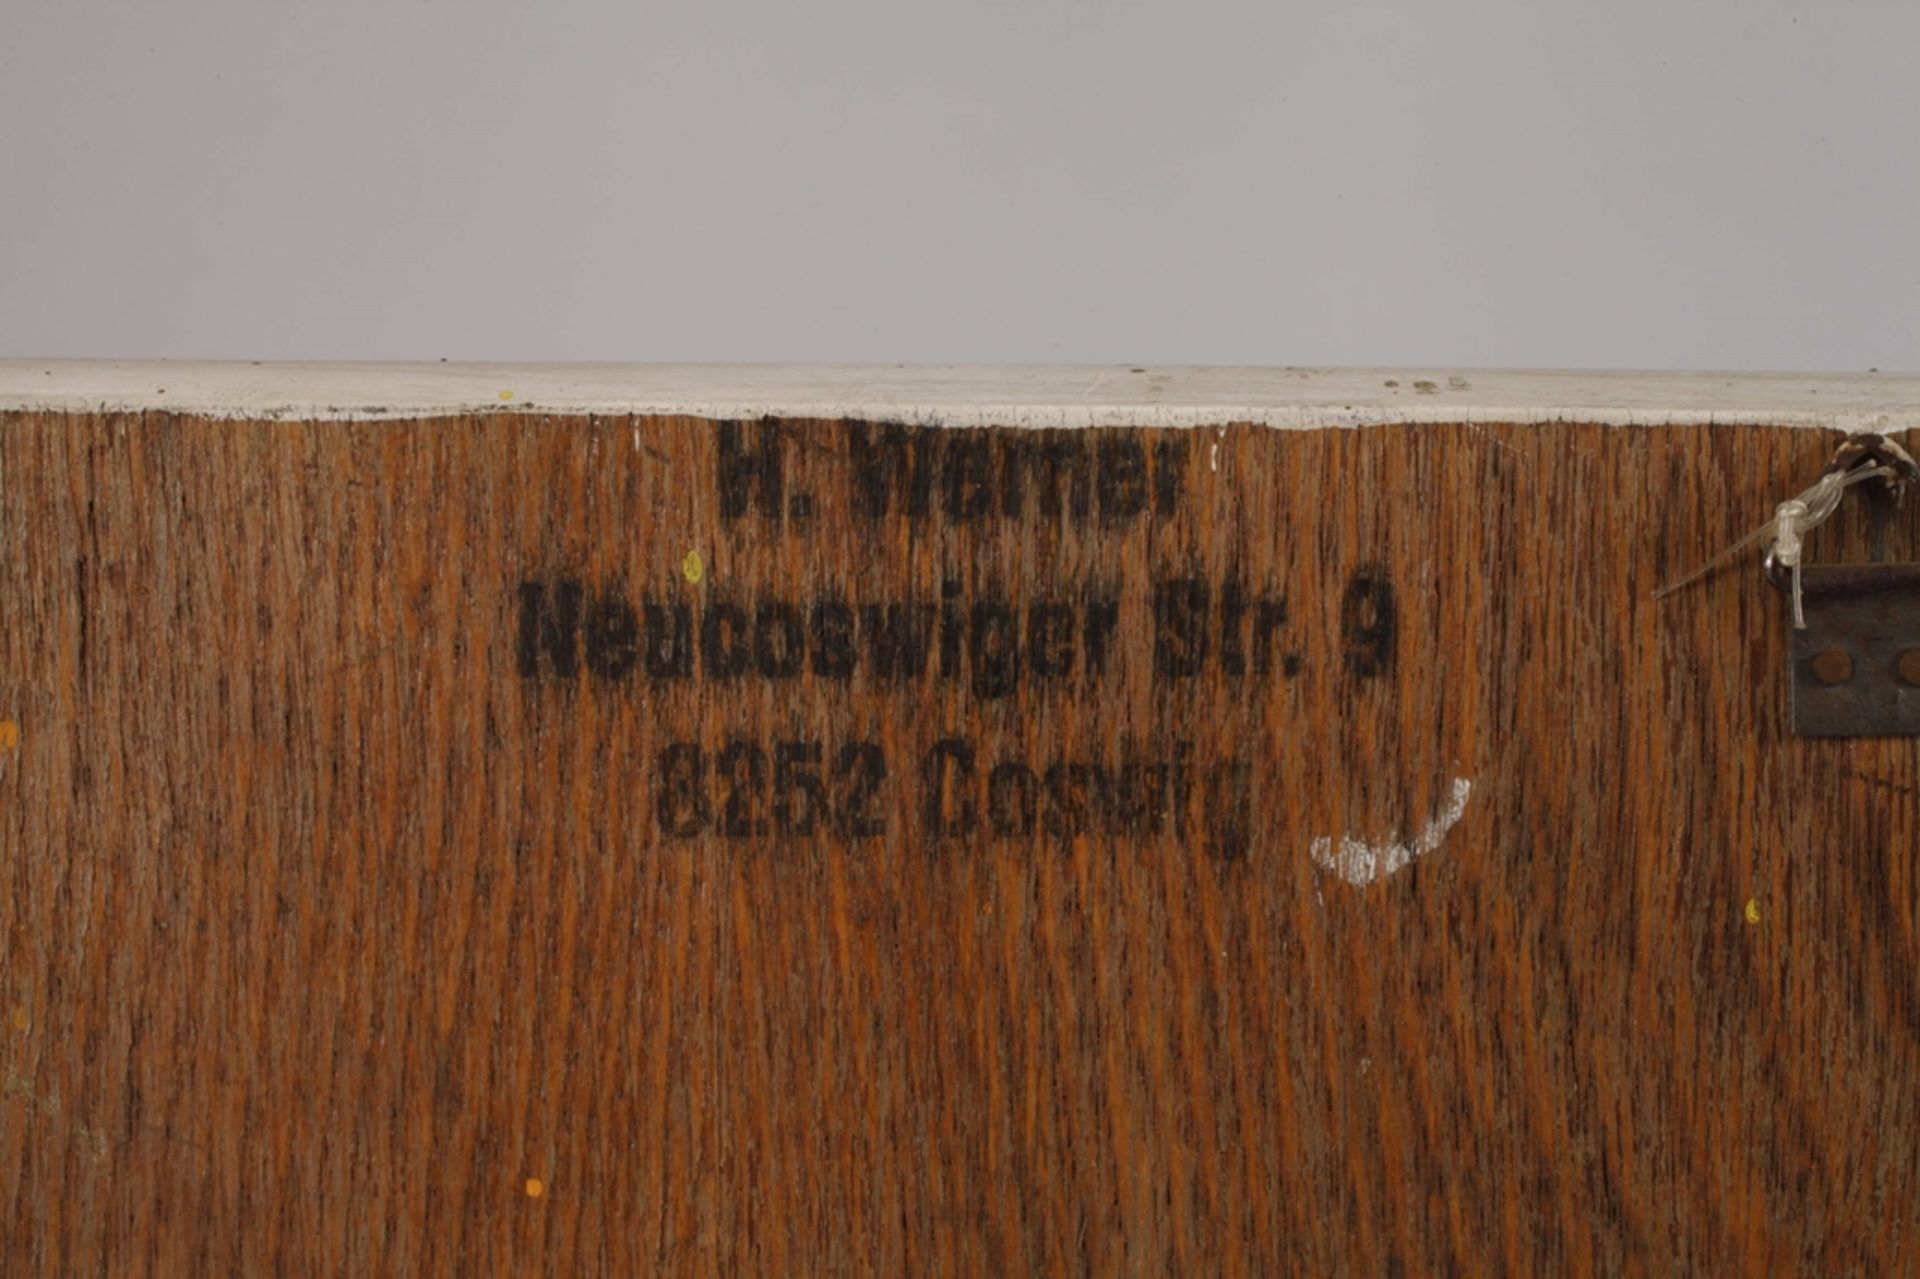 Prof. Heinz Werner, Resting on the Bench - Image 5 of 5